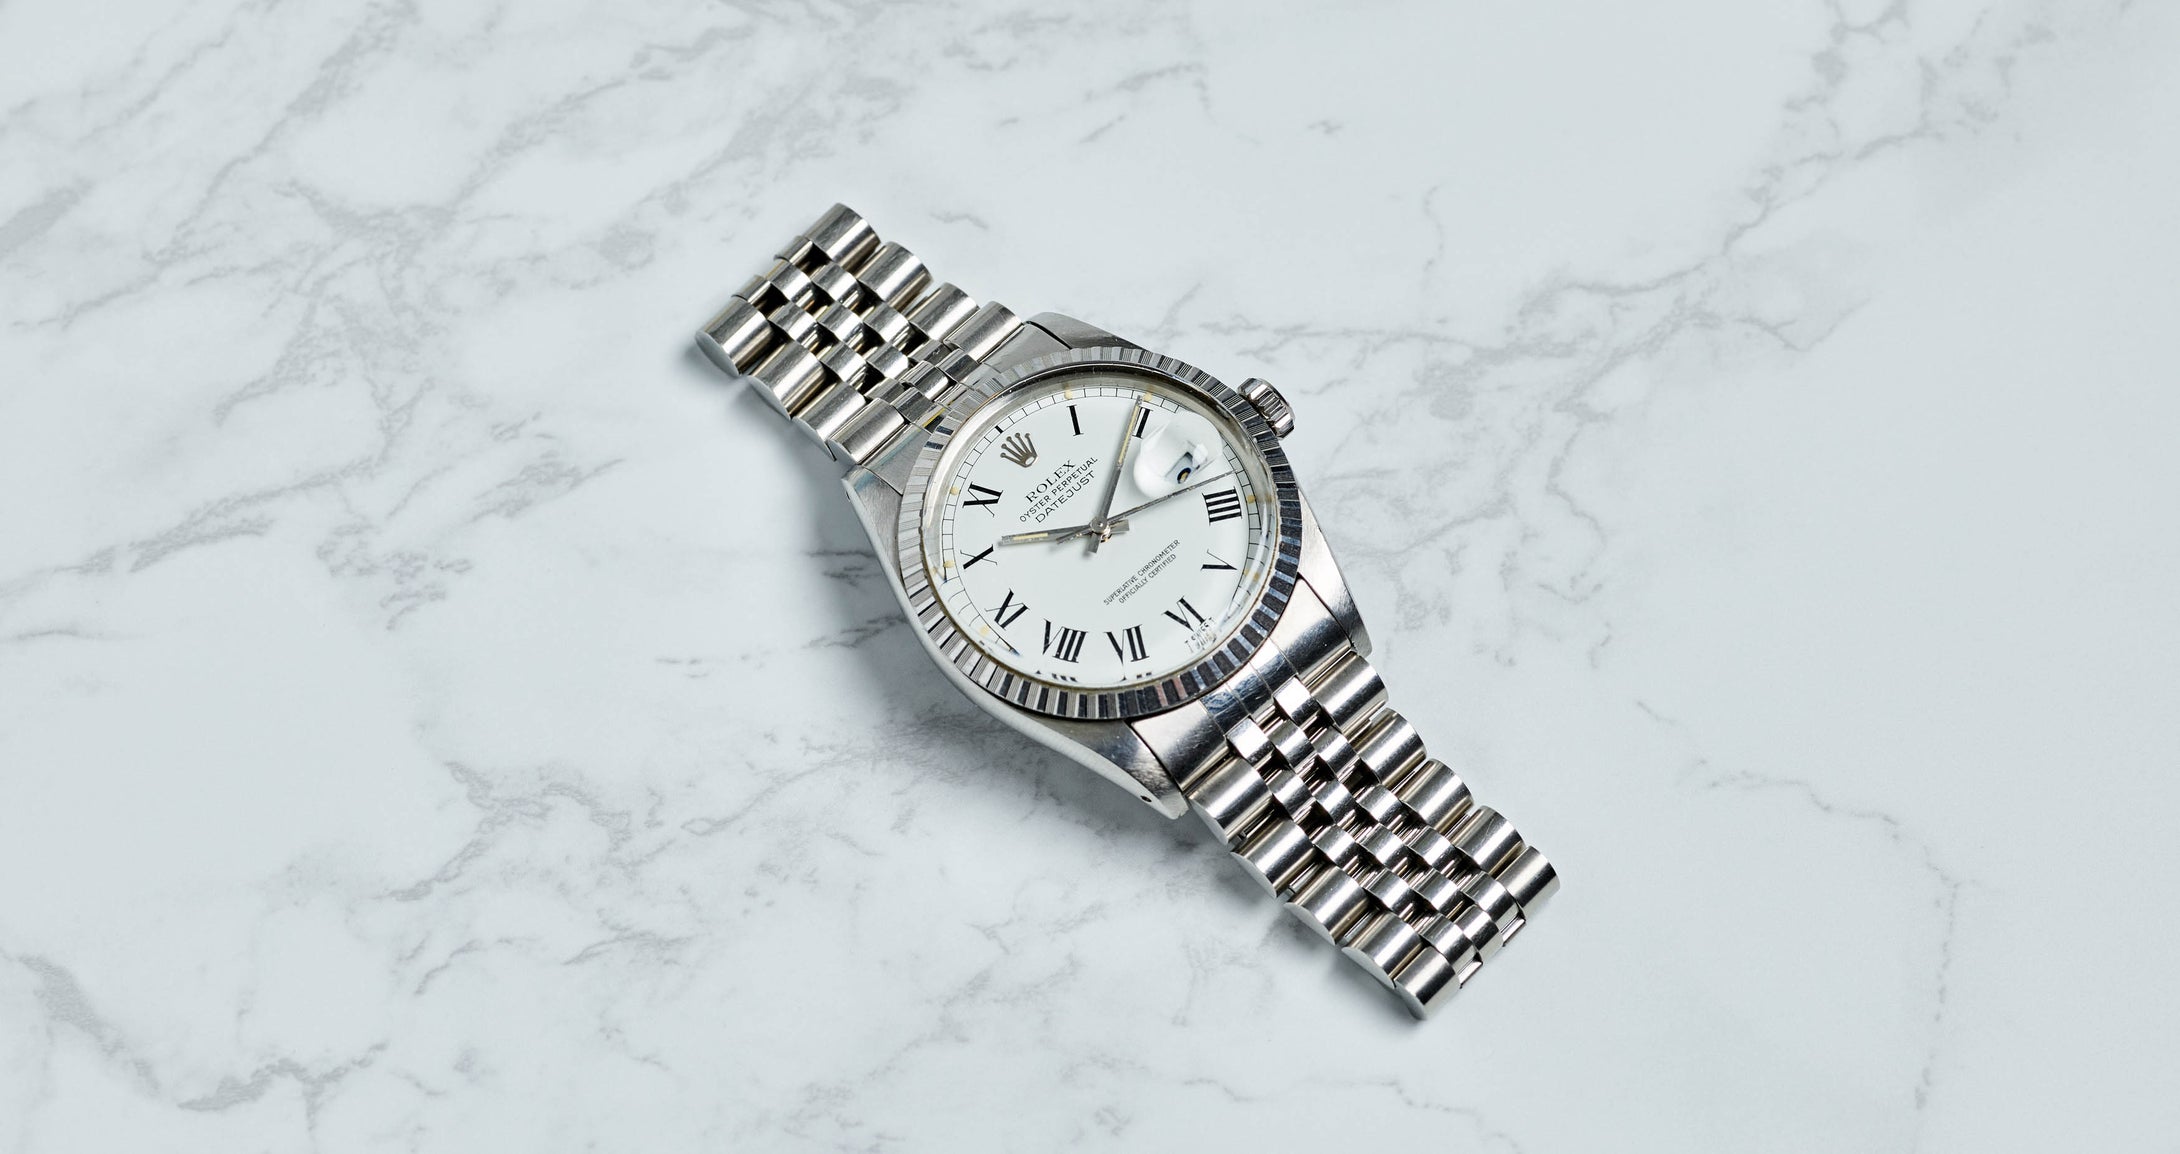 Rolex Stainless Steel Oyster Perpetual White Buckley Datejust Vintage Watch | Veralet